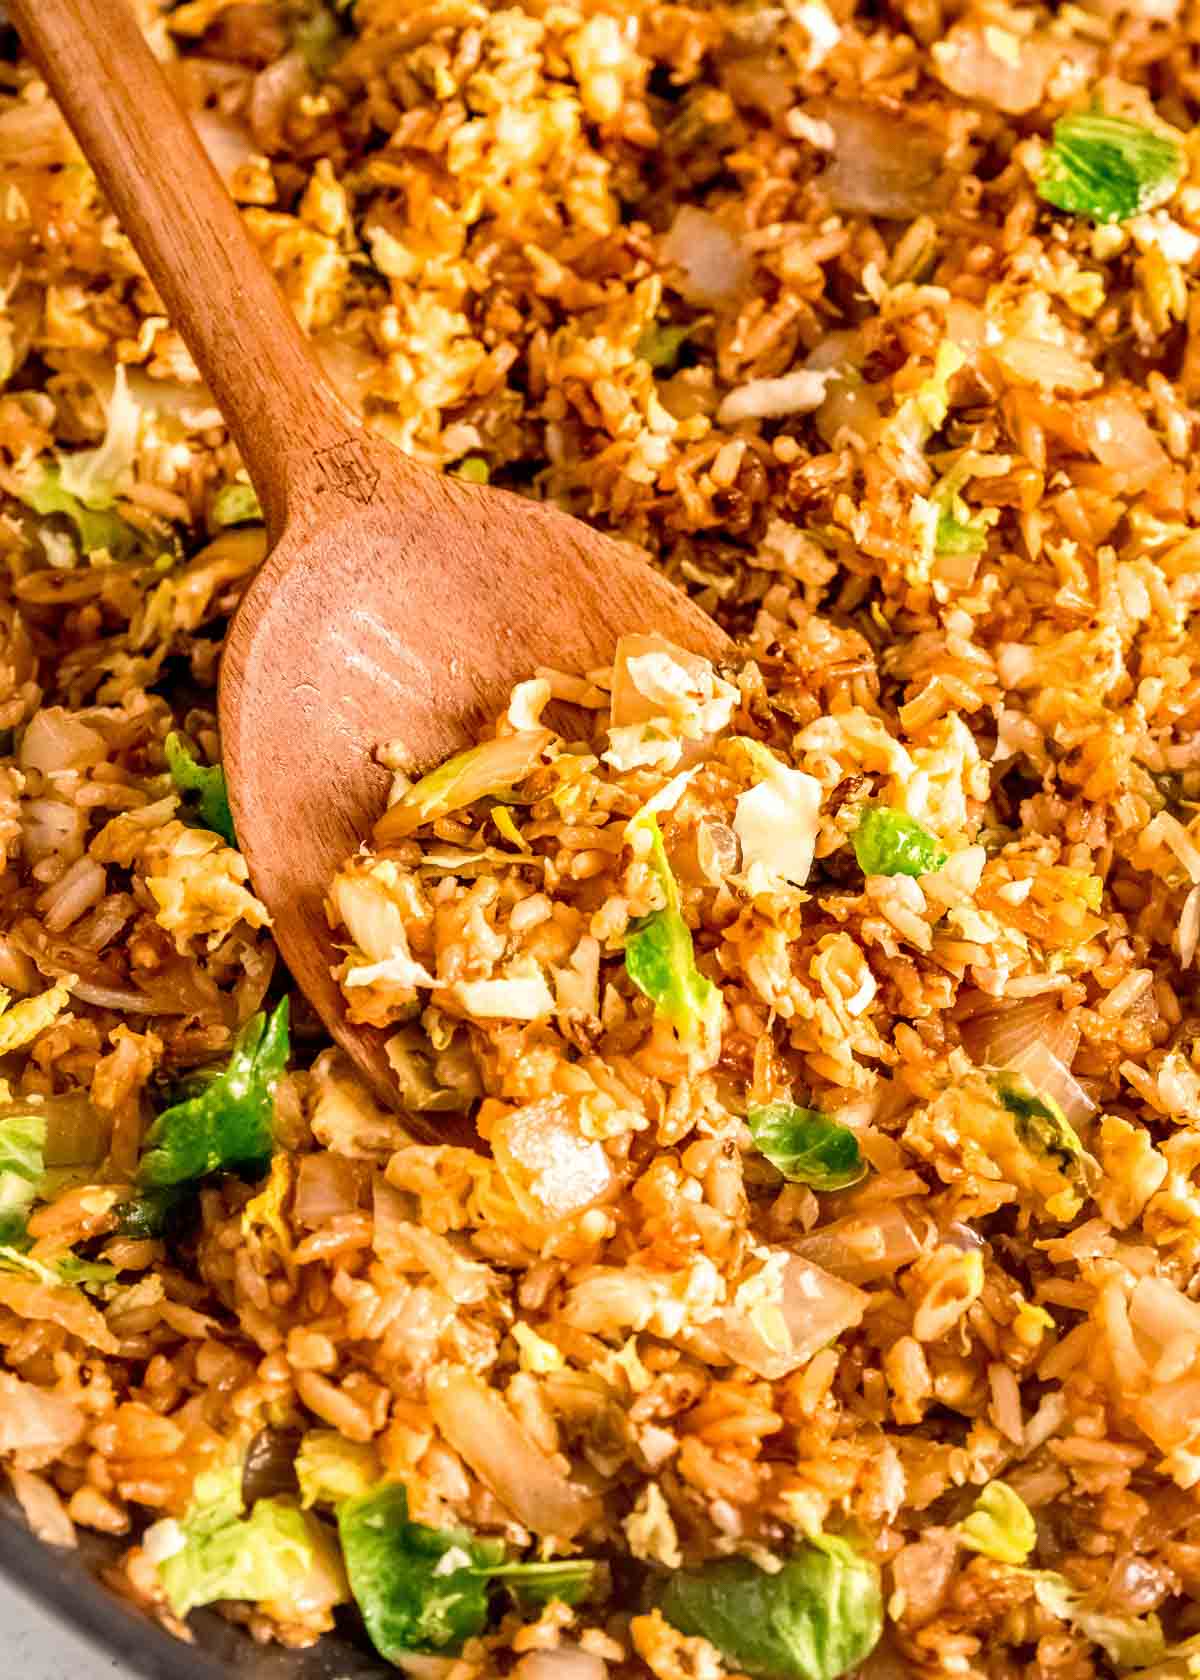 brussels sprout fried rice in a pan stirred with a wooden spoon